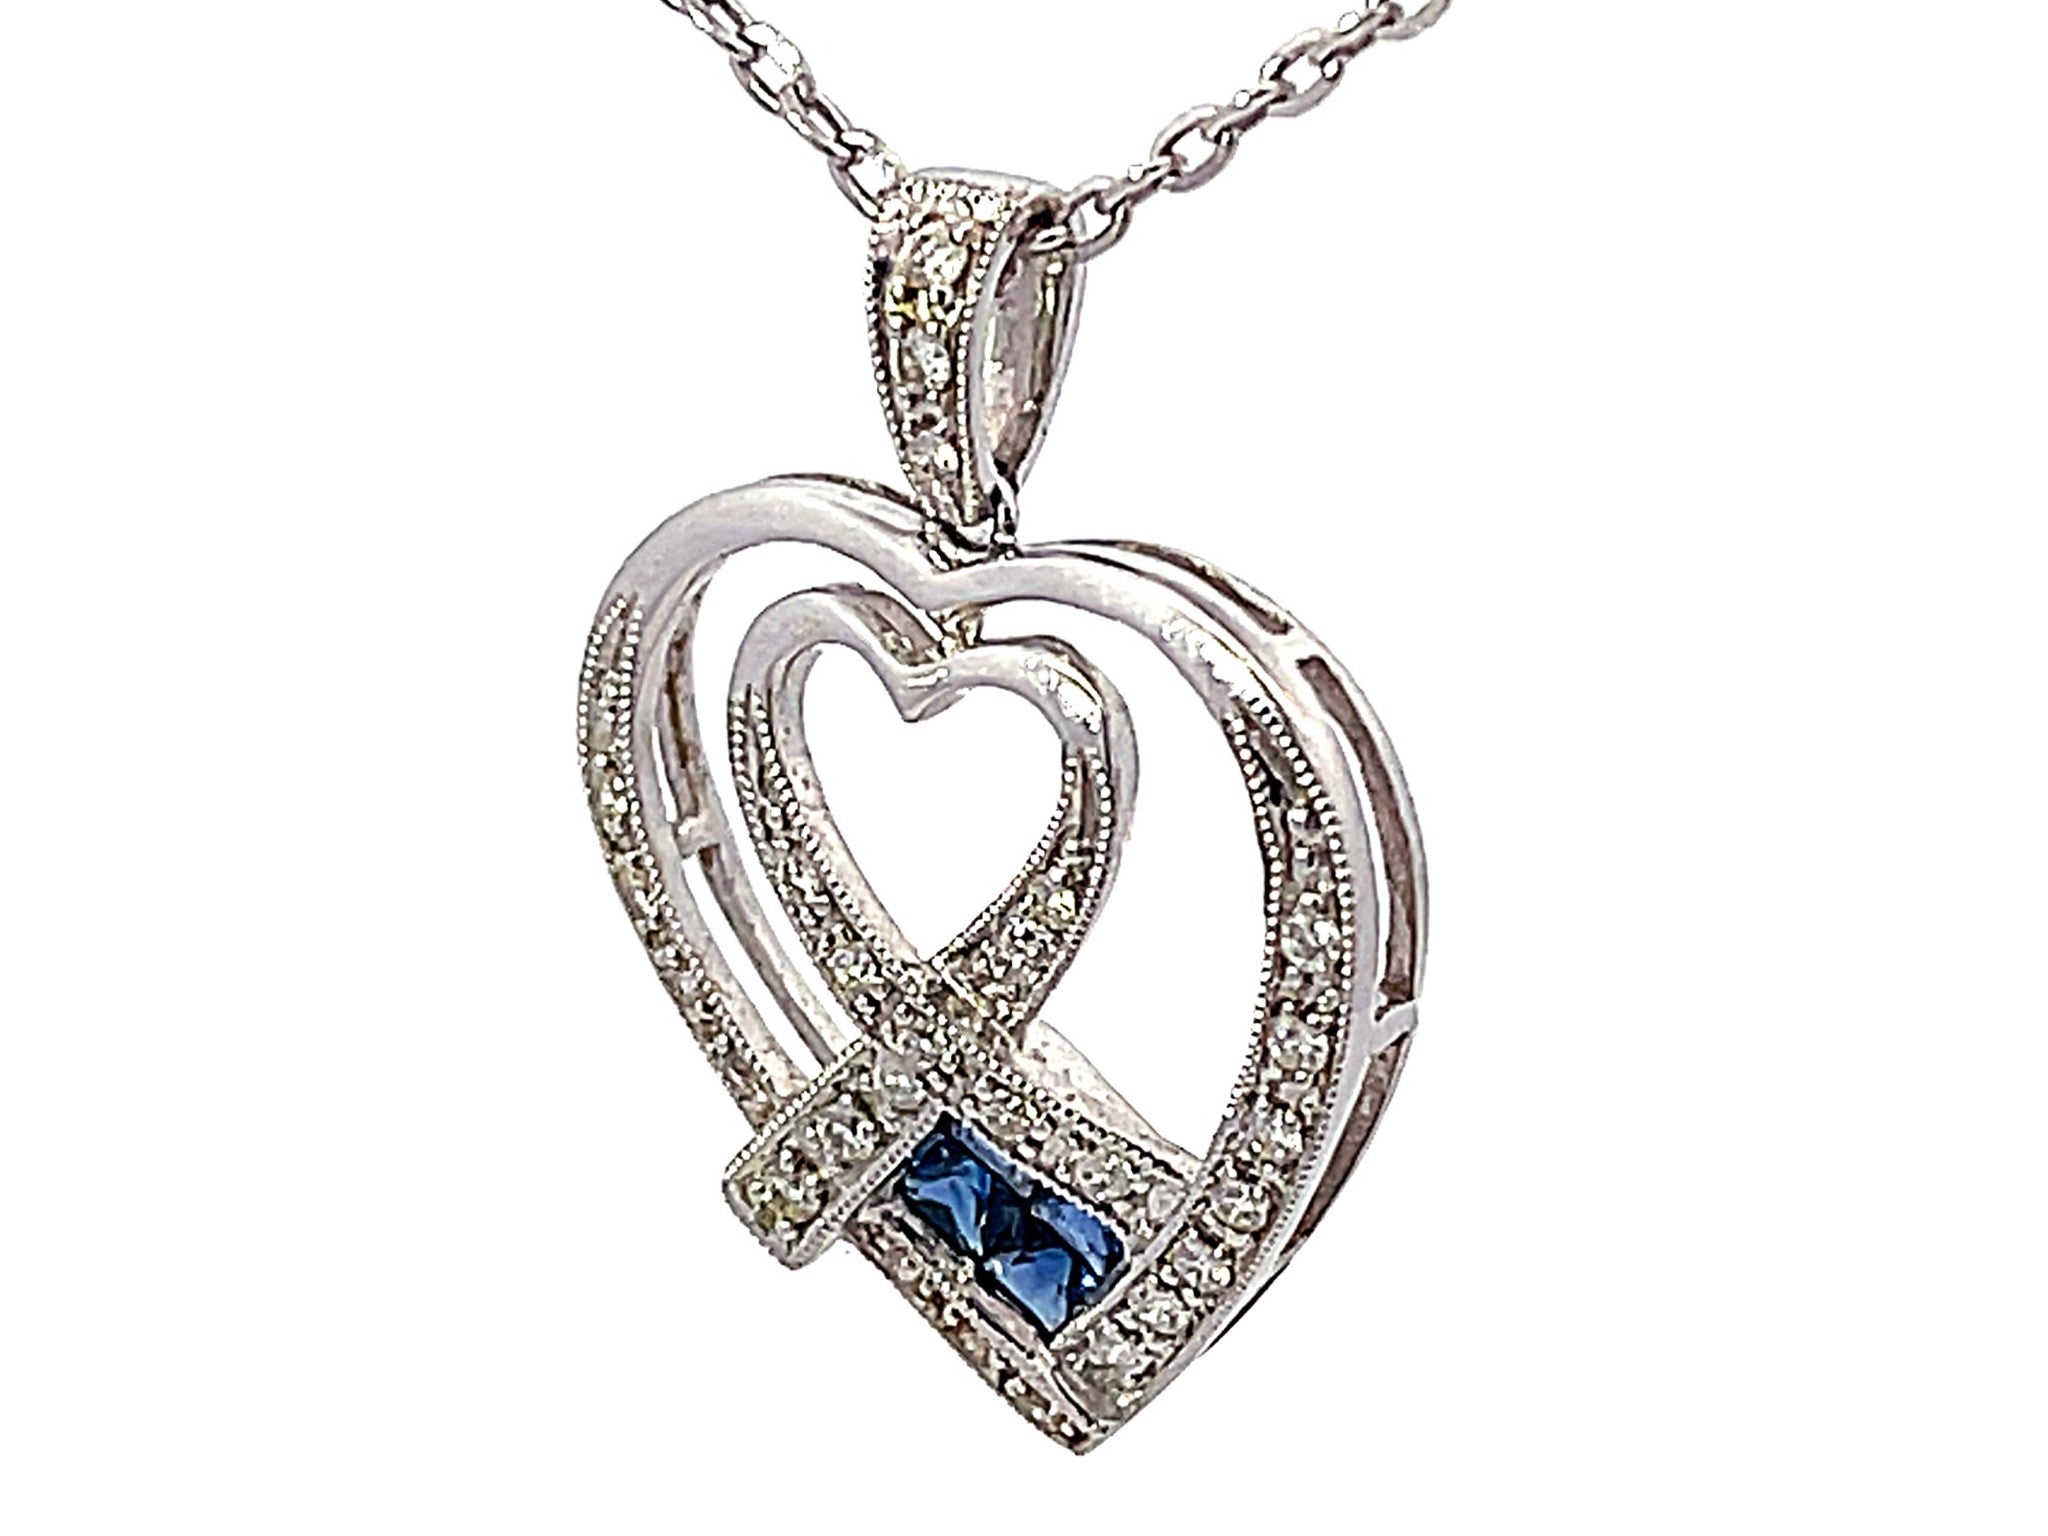 Diamond and Sapphire Heart Necklace in 18k White Gold